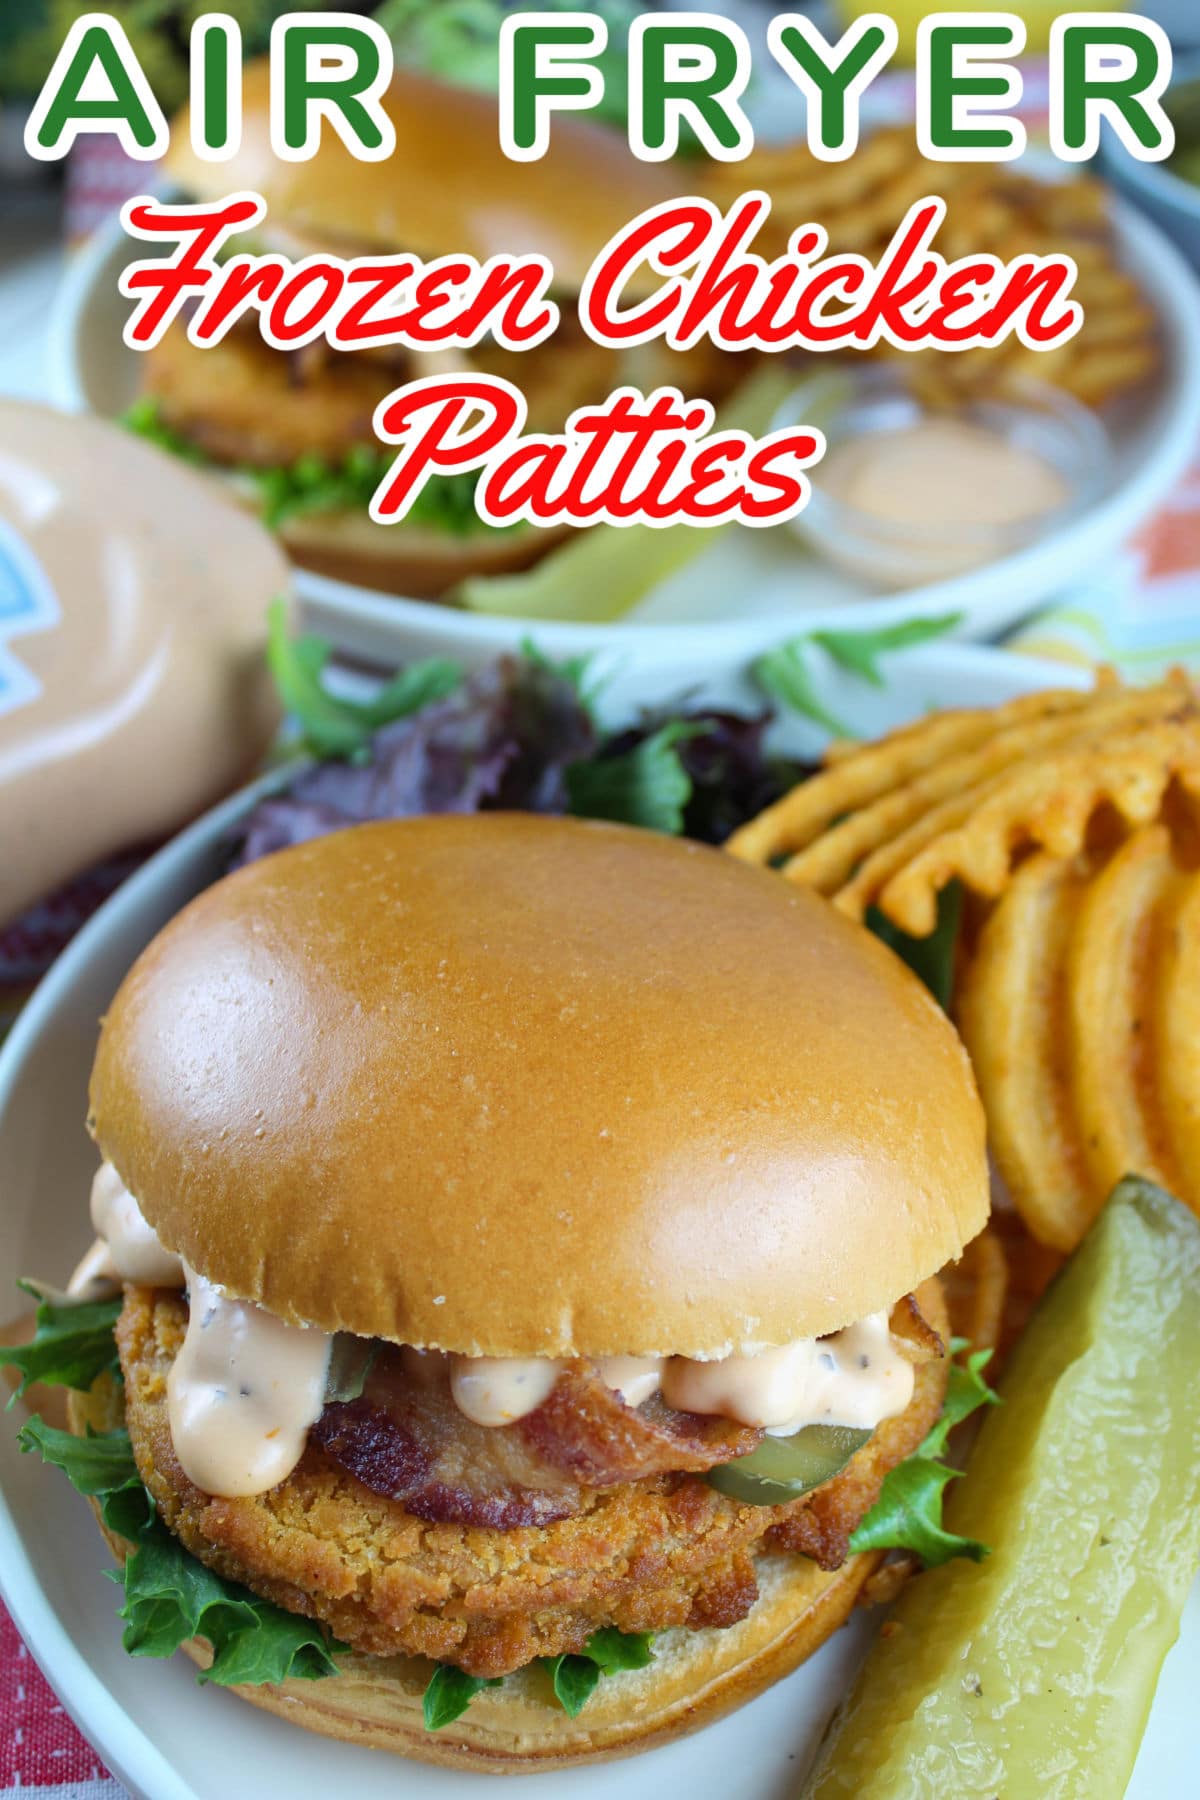 Air Fryer Frozen Chicken Patties are the best quick dinner!!! Grab some buns - grab some chicken patties out of the freezer and in 10-12 min - you've got a quick dinner on the table! via @foodhussy